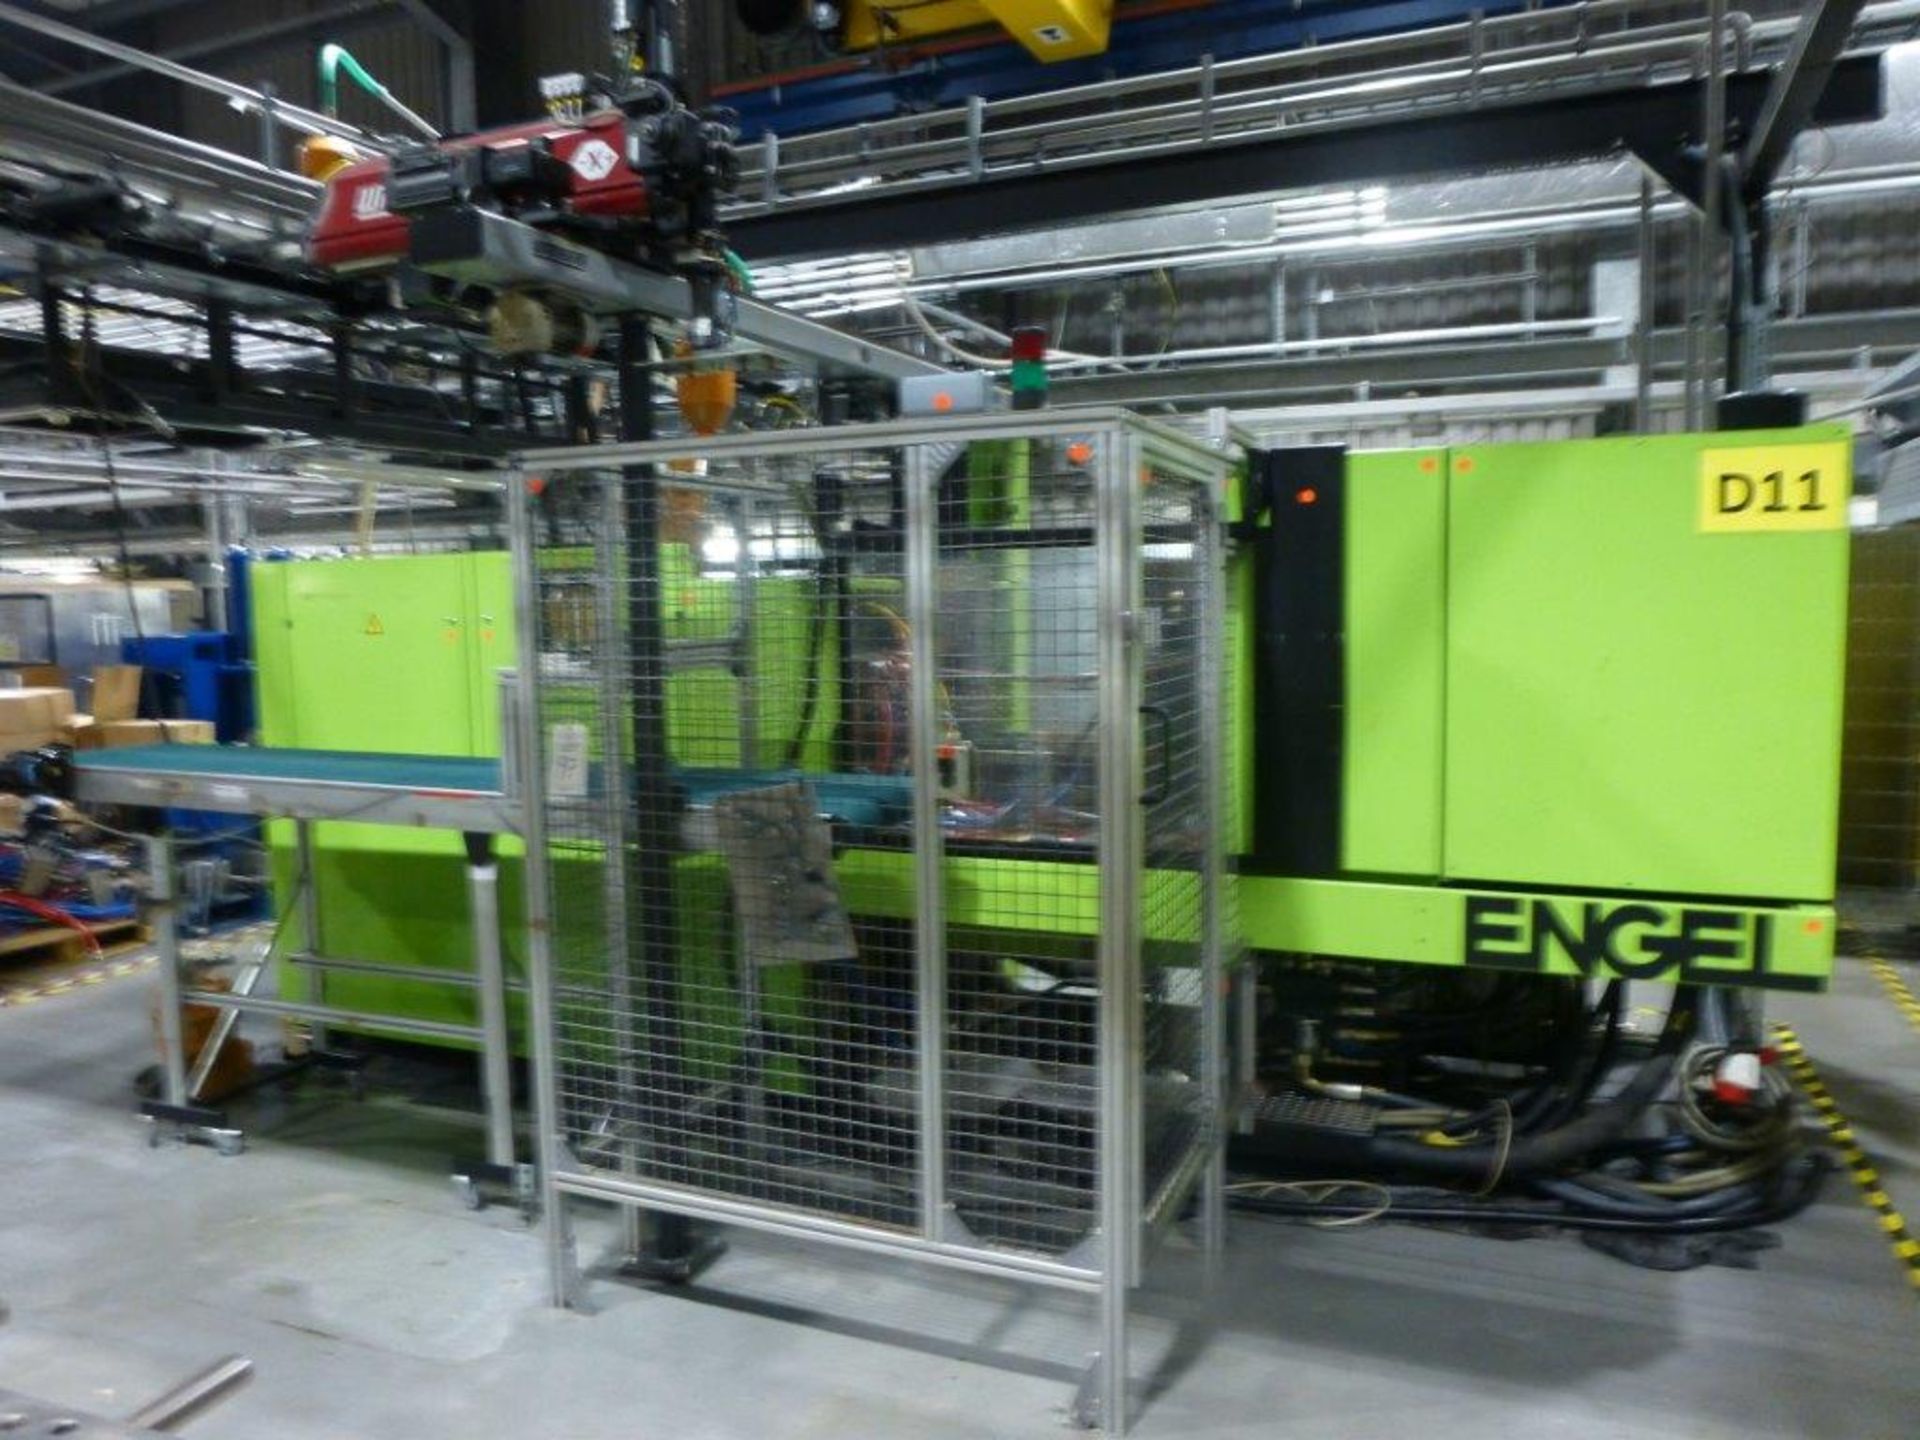 Engel Victory 500/150 Tech CNC Plastic Injection Moulding Machine Serial No. 46973 (2002) with - Image 5 of 8